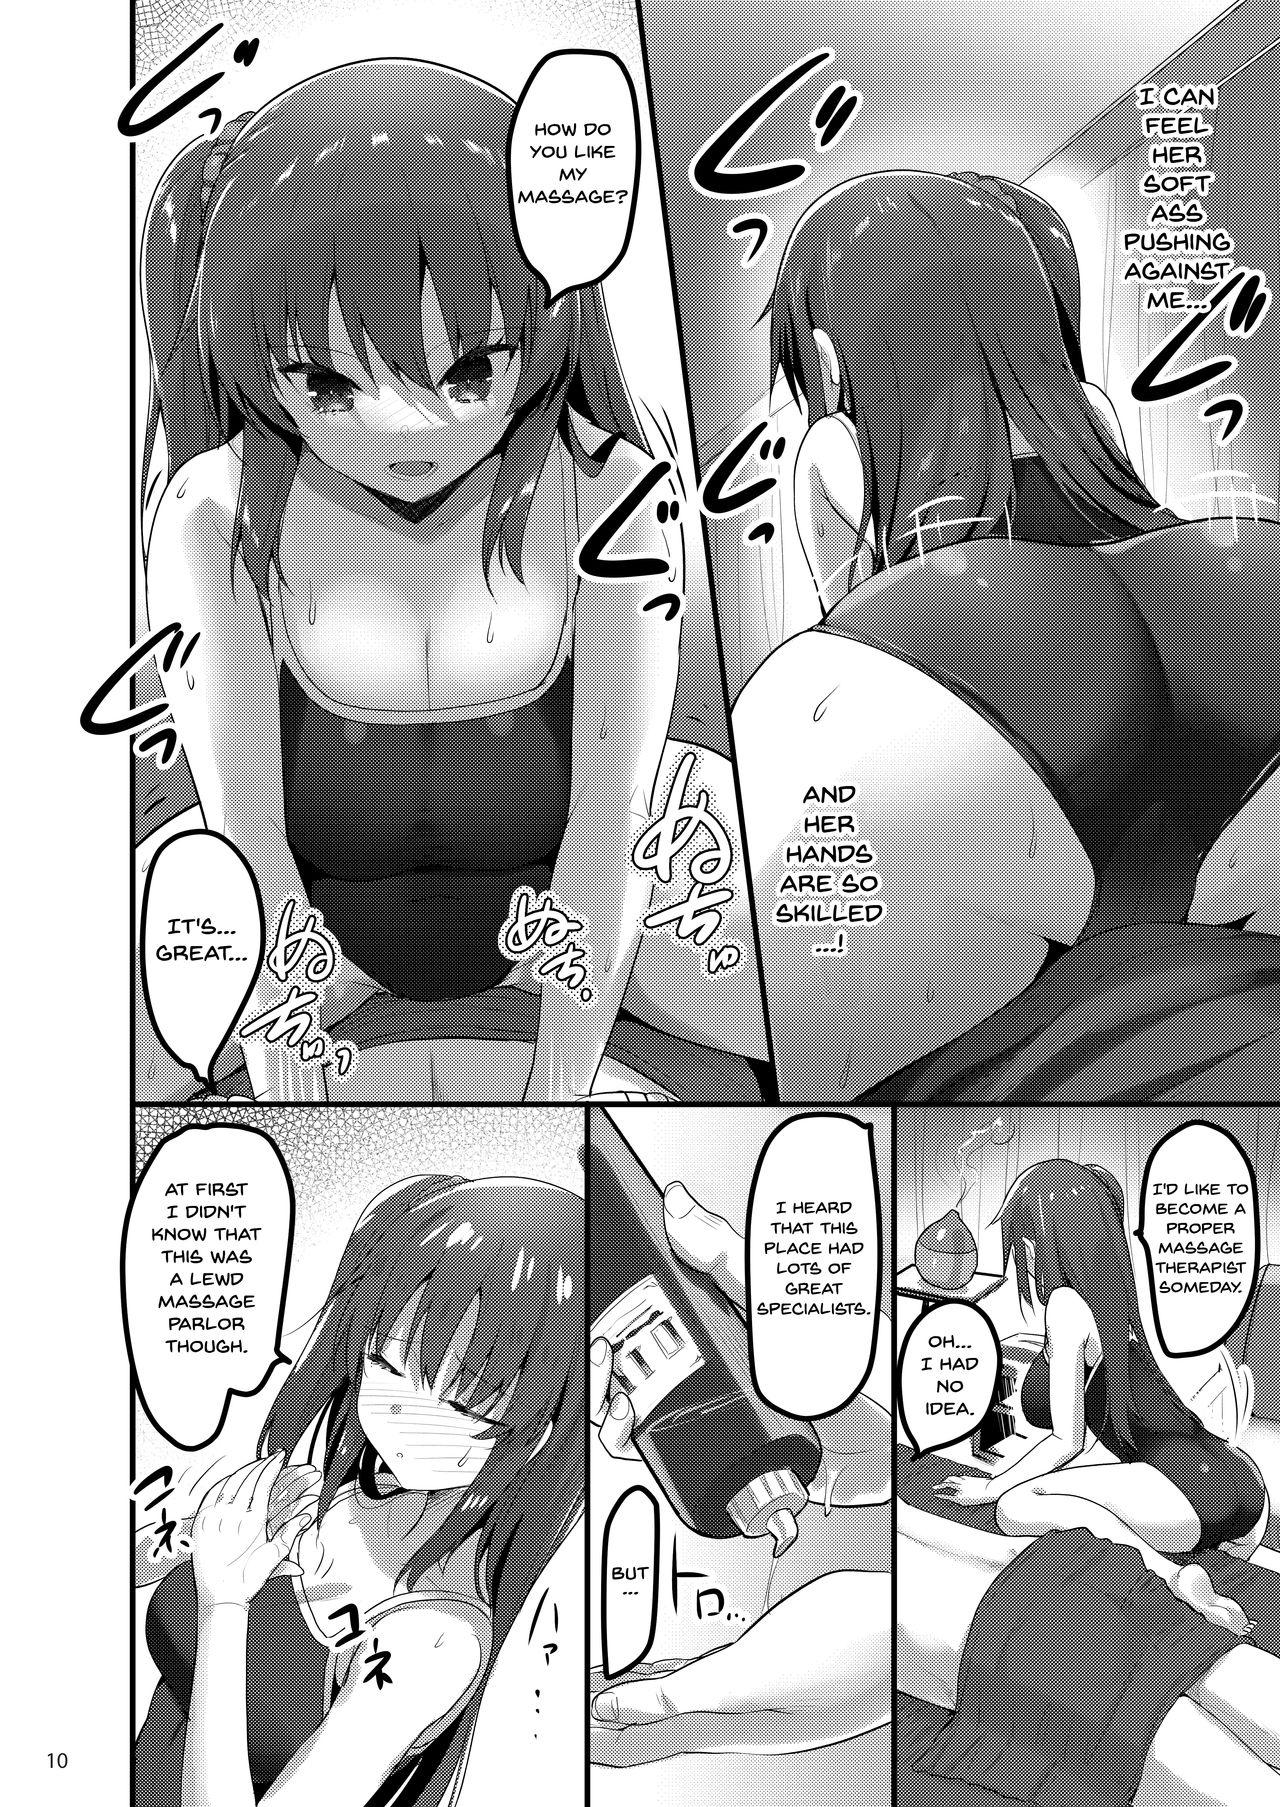 Making Love Porn Ecchi na Massage-ya ni Kitara Classmate ga Dete Kita Hanashi | A Story Of Going Out To Get a Massage And The One Who Shows Up Is My Classmate - Original Gay Boys - Page 9